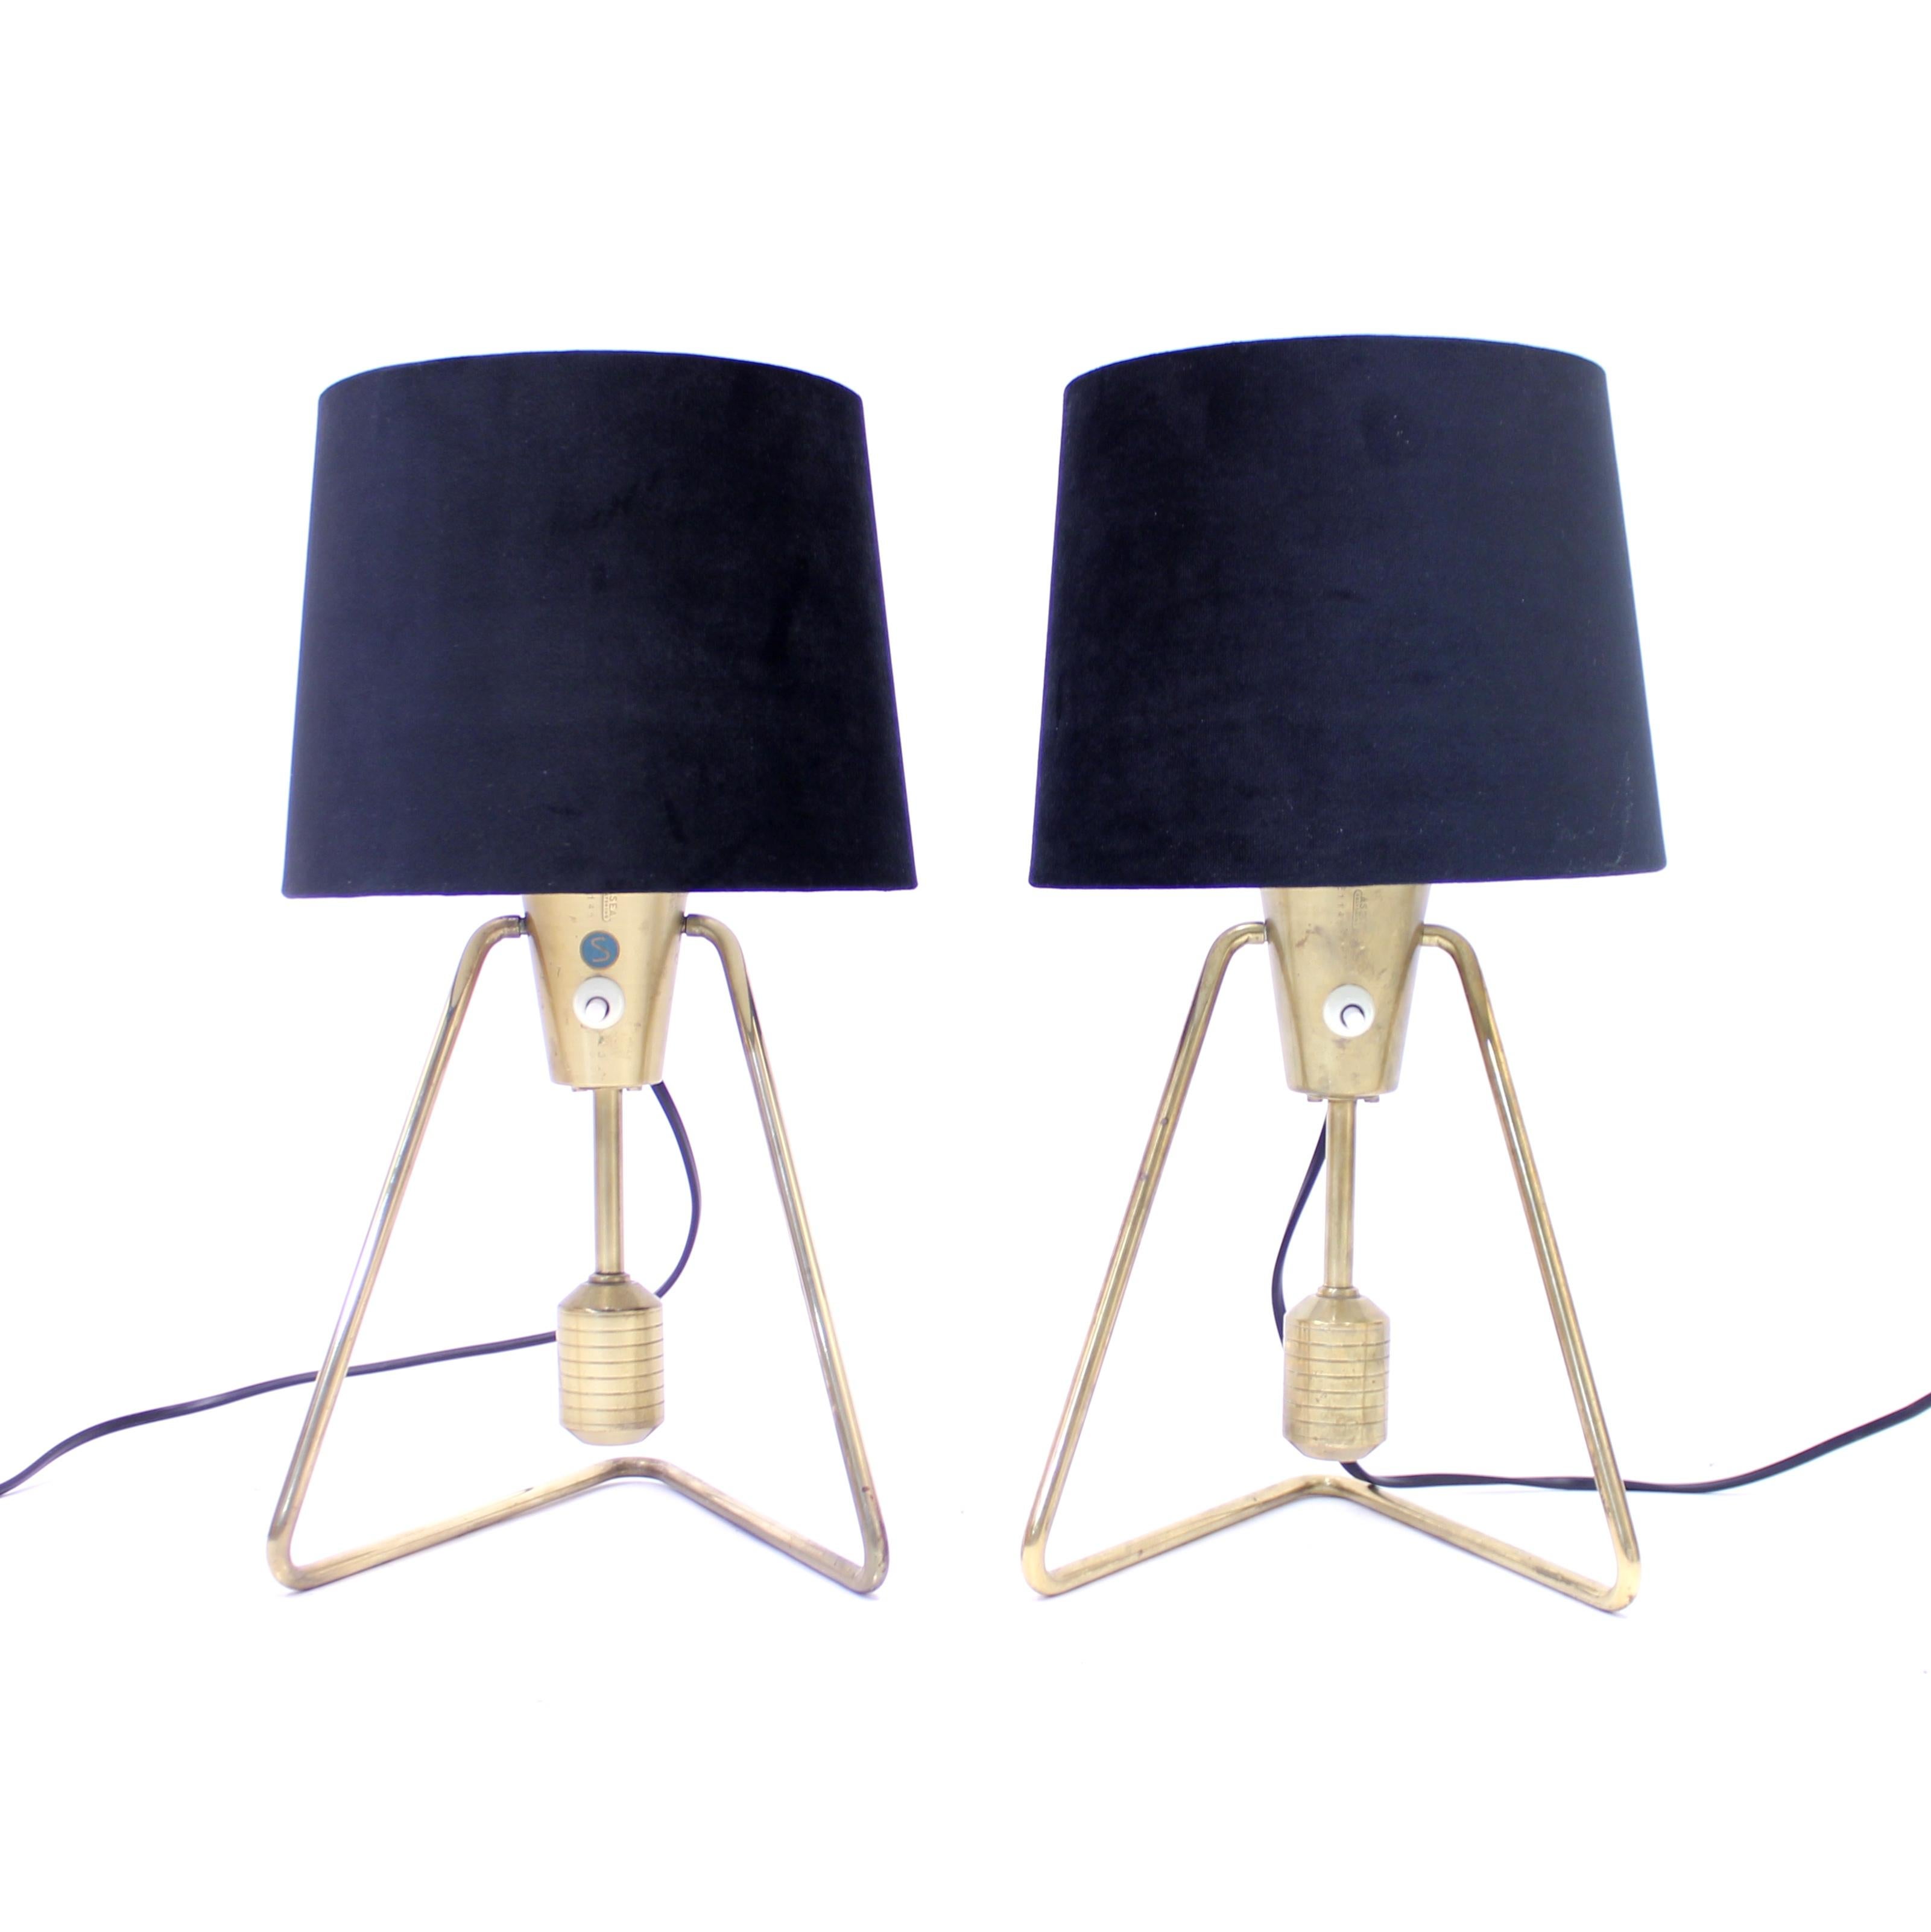 Pair of rare ASEA brass table or wall lamps from the 1950s. New black velvet shades with a diameter of 20 cm. Very good vintage condition with light ware consistent with age and use.